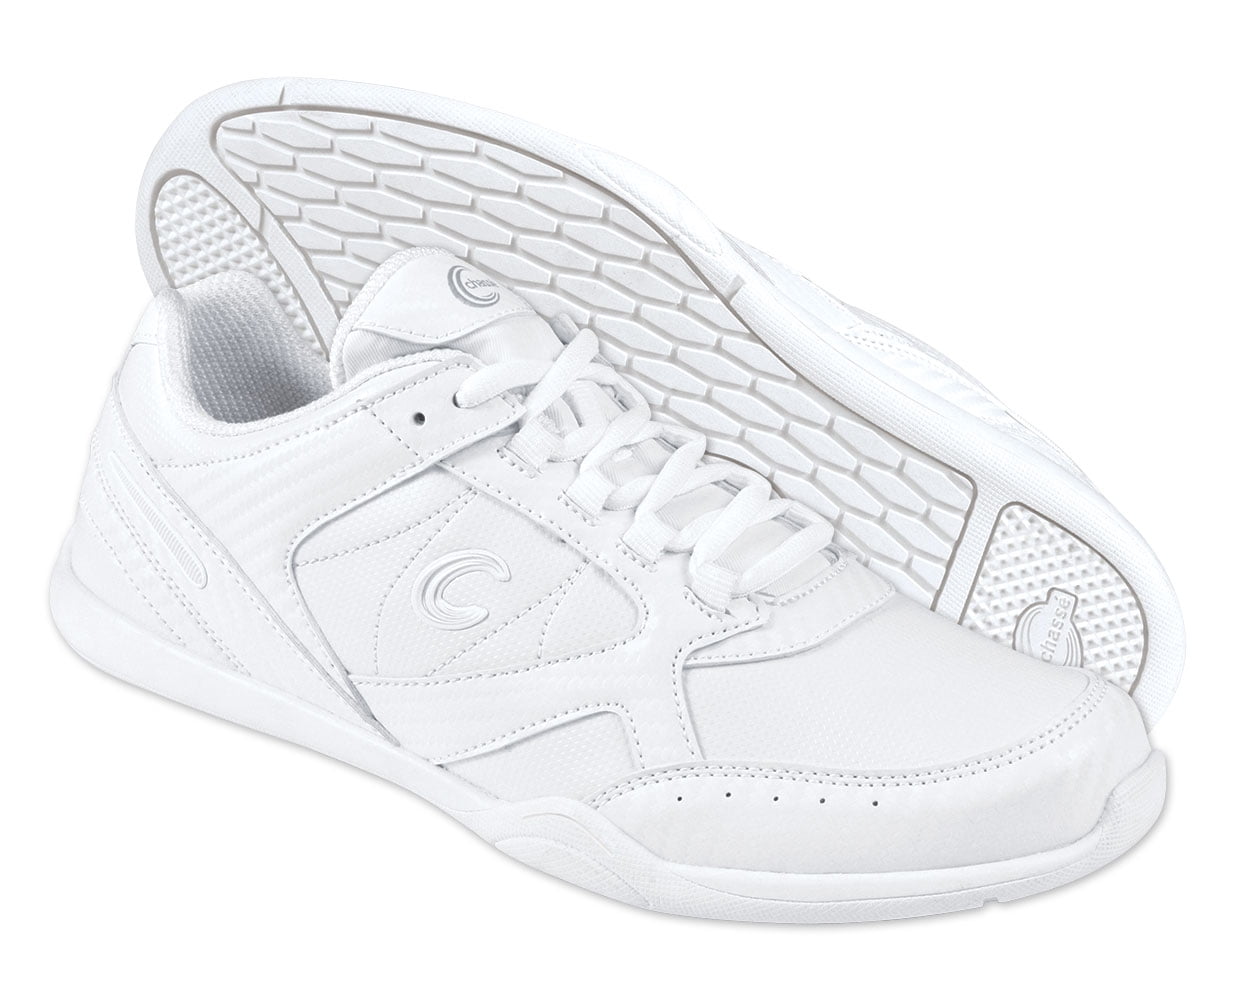 White Cheer Shoes for Girls Details about   Chassé Ace II Cheerleading Shoes 